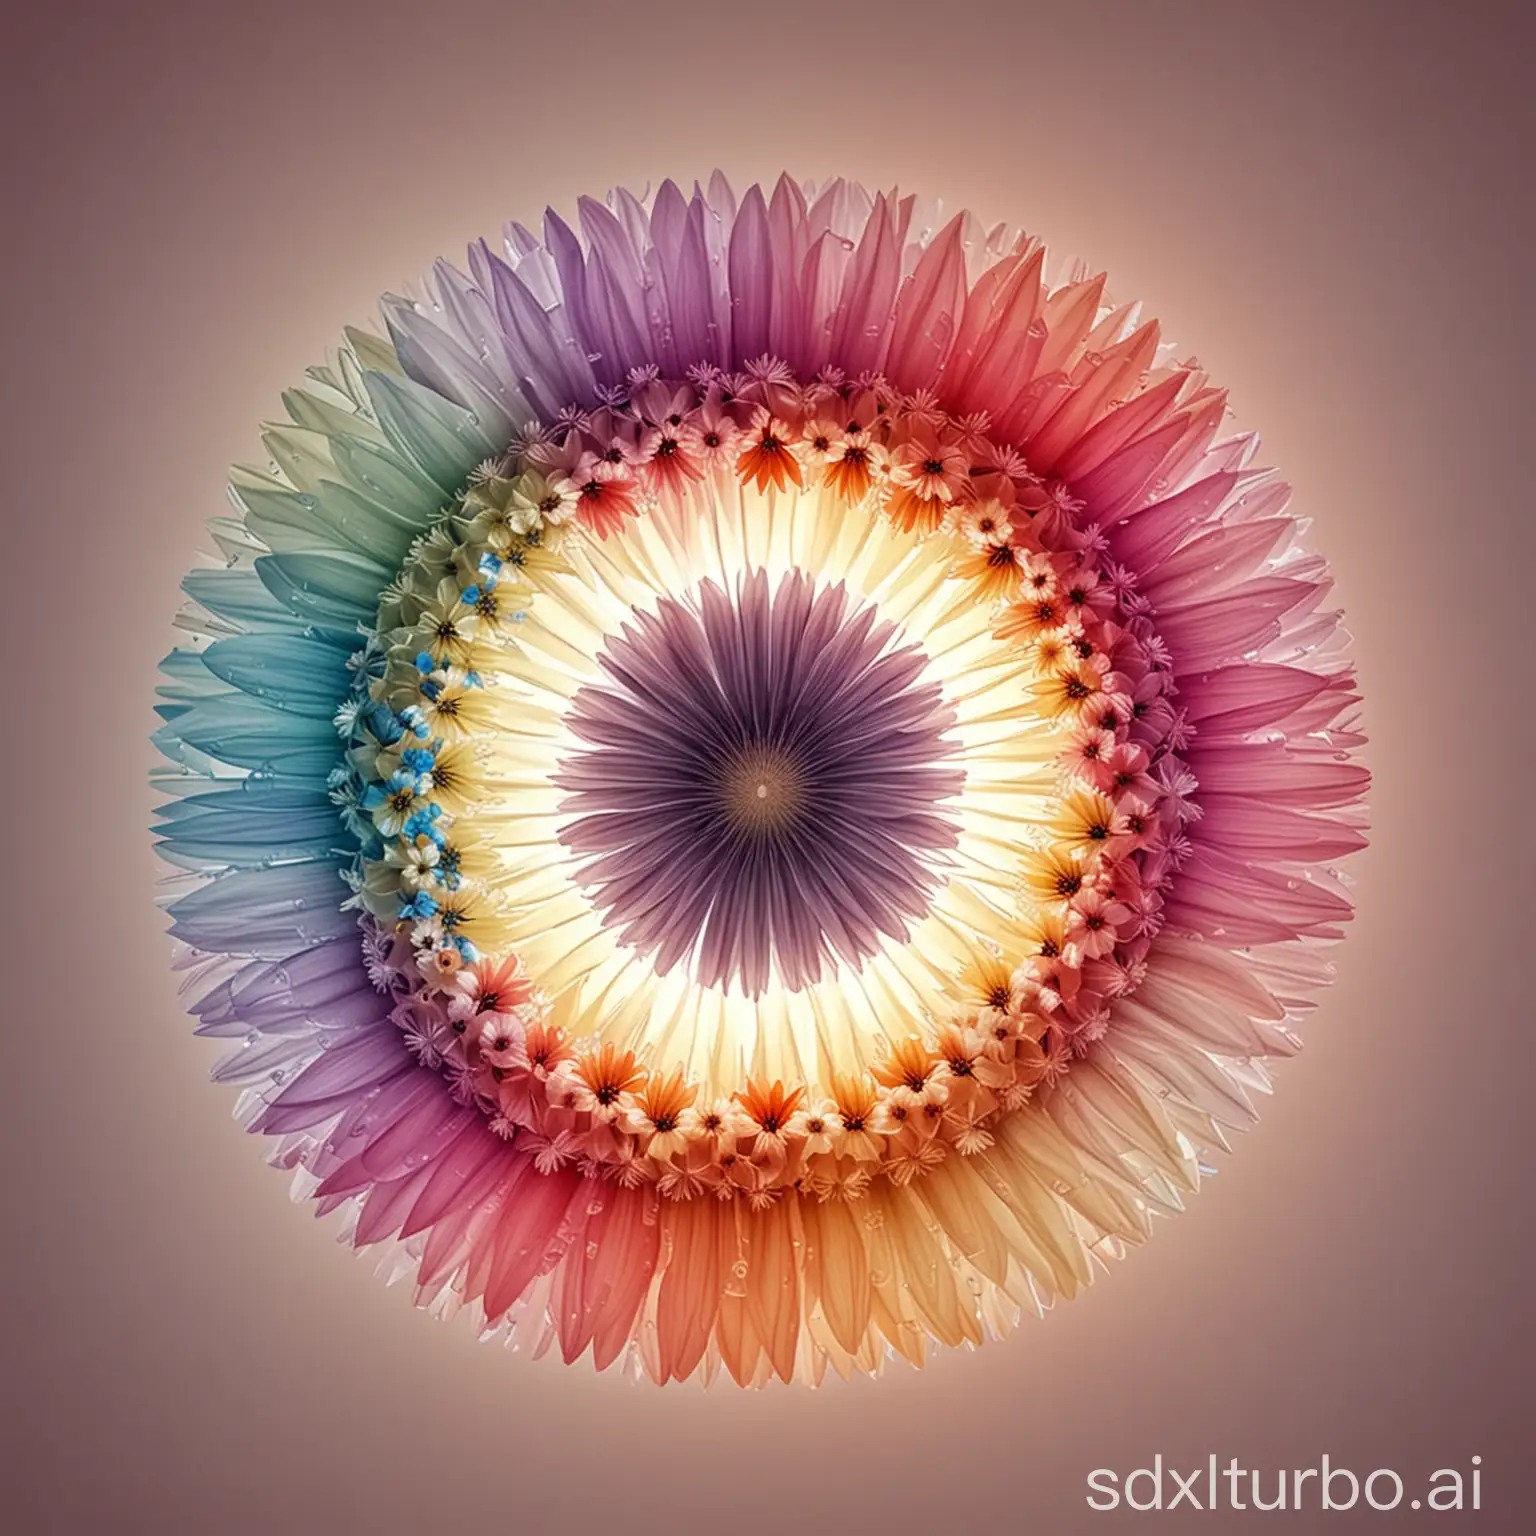 radial composition with flowers in translucent colors --v 6.0